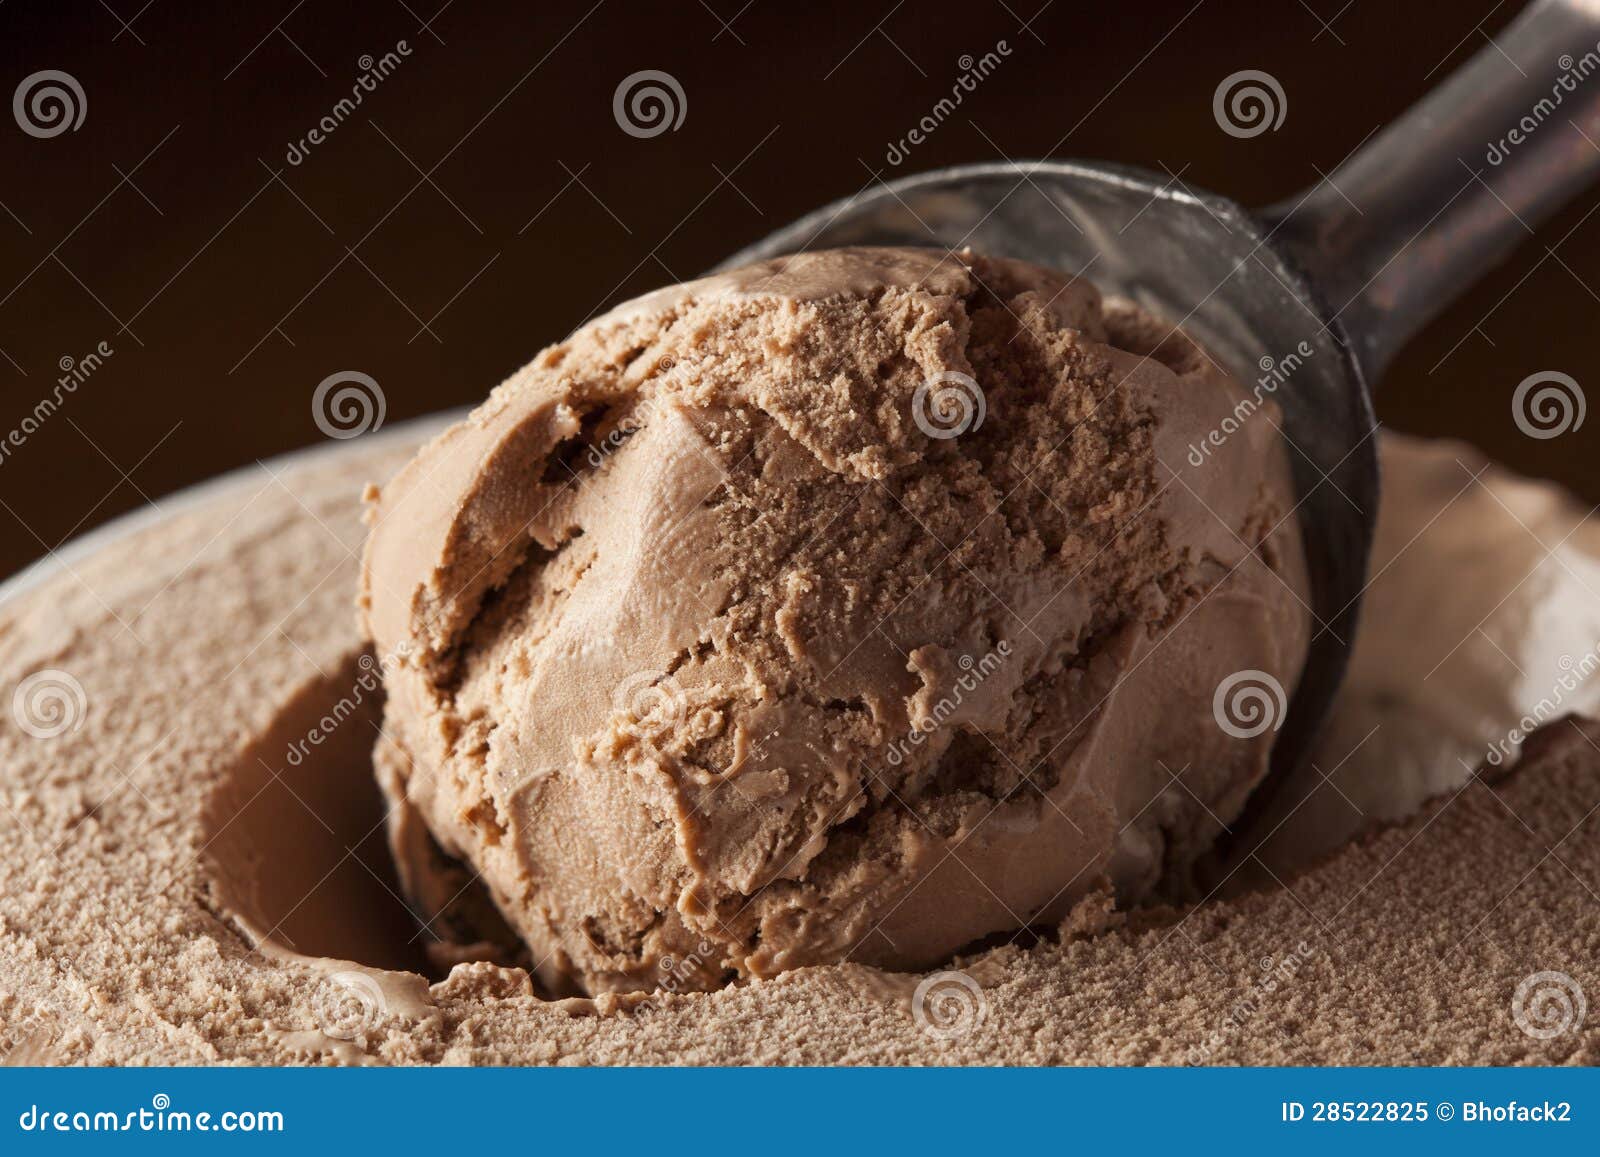 157 Ice Cream Cold Storage Stock Photos - Free & Royalty-Free Stock Photos  from Dreamstime